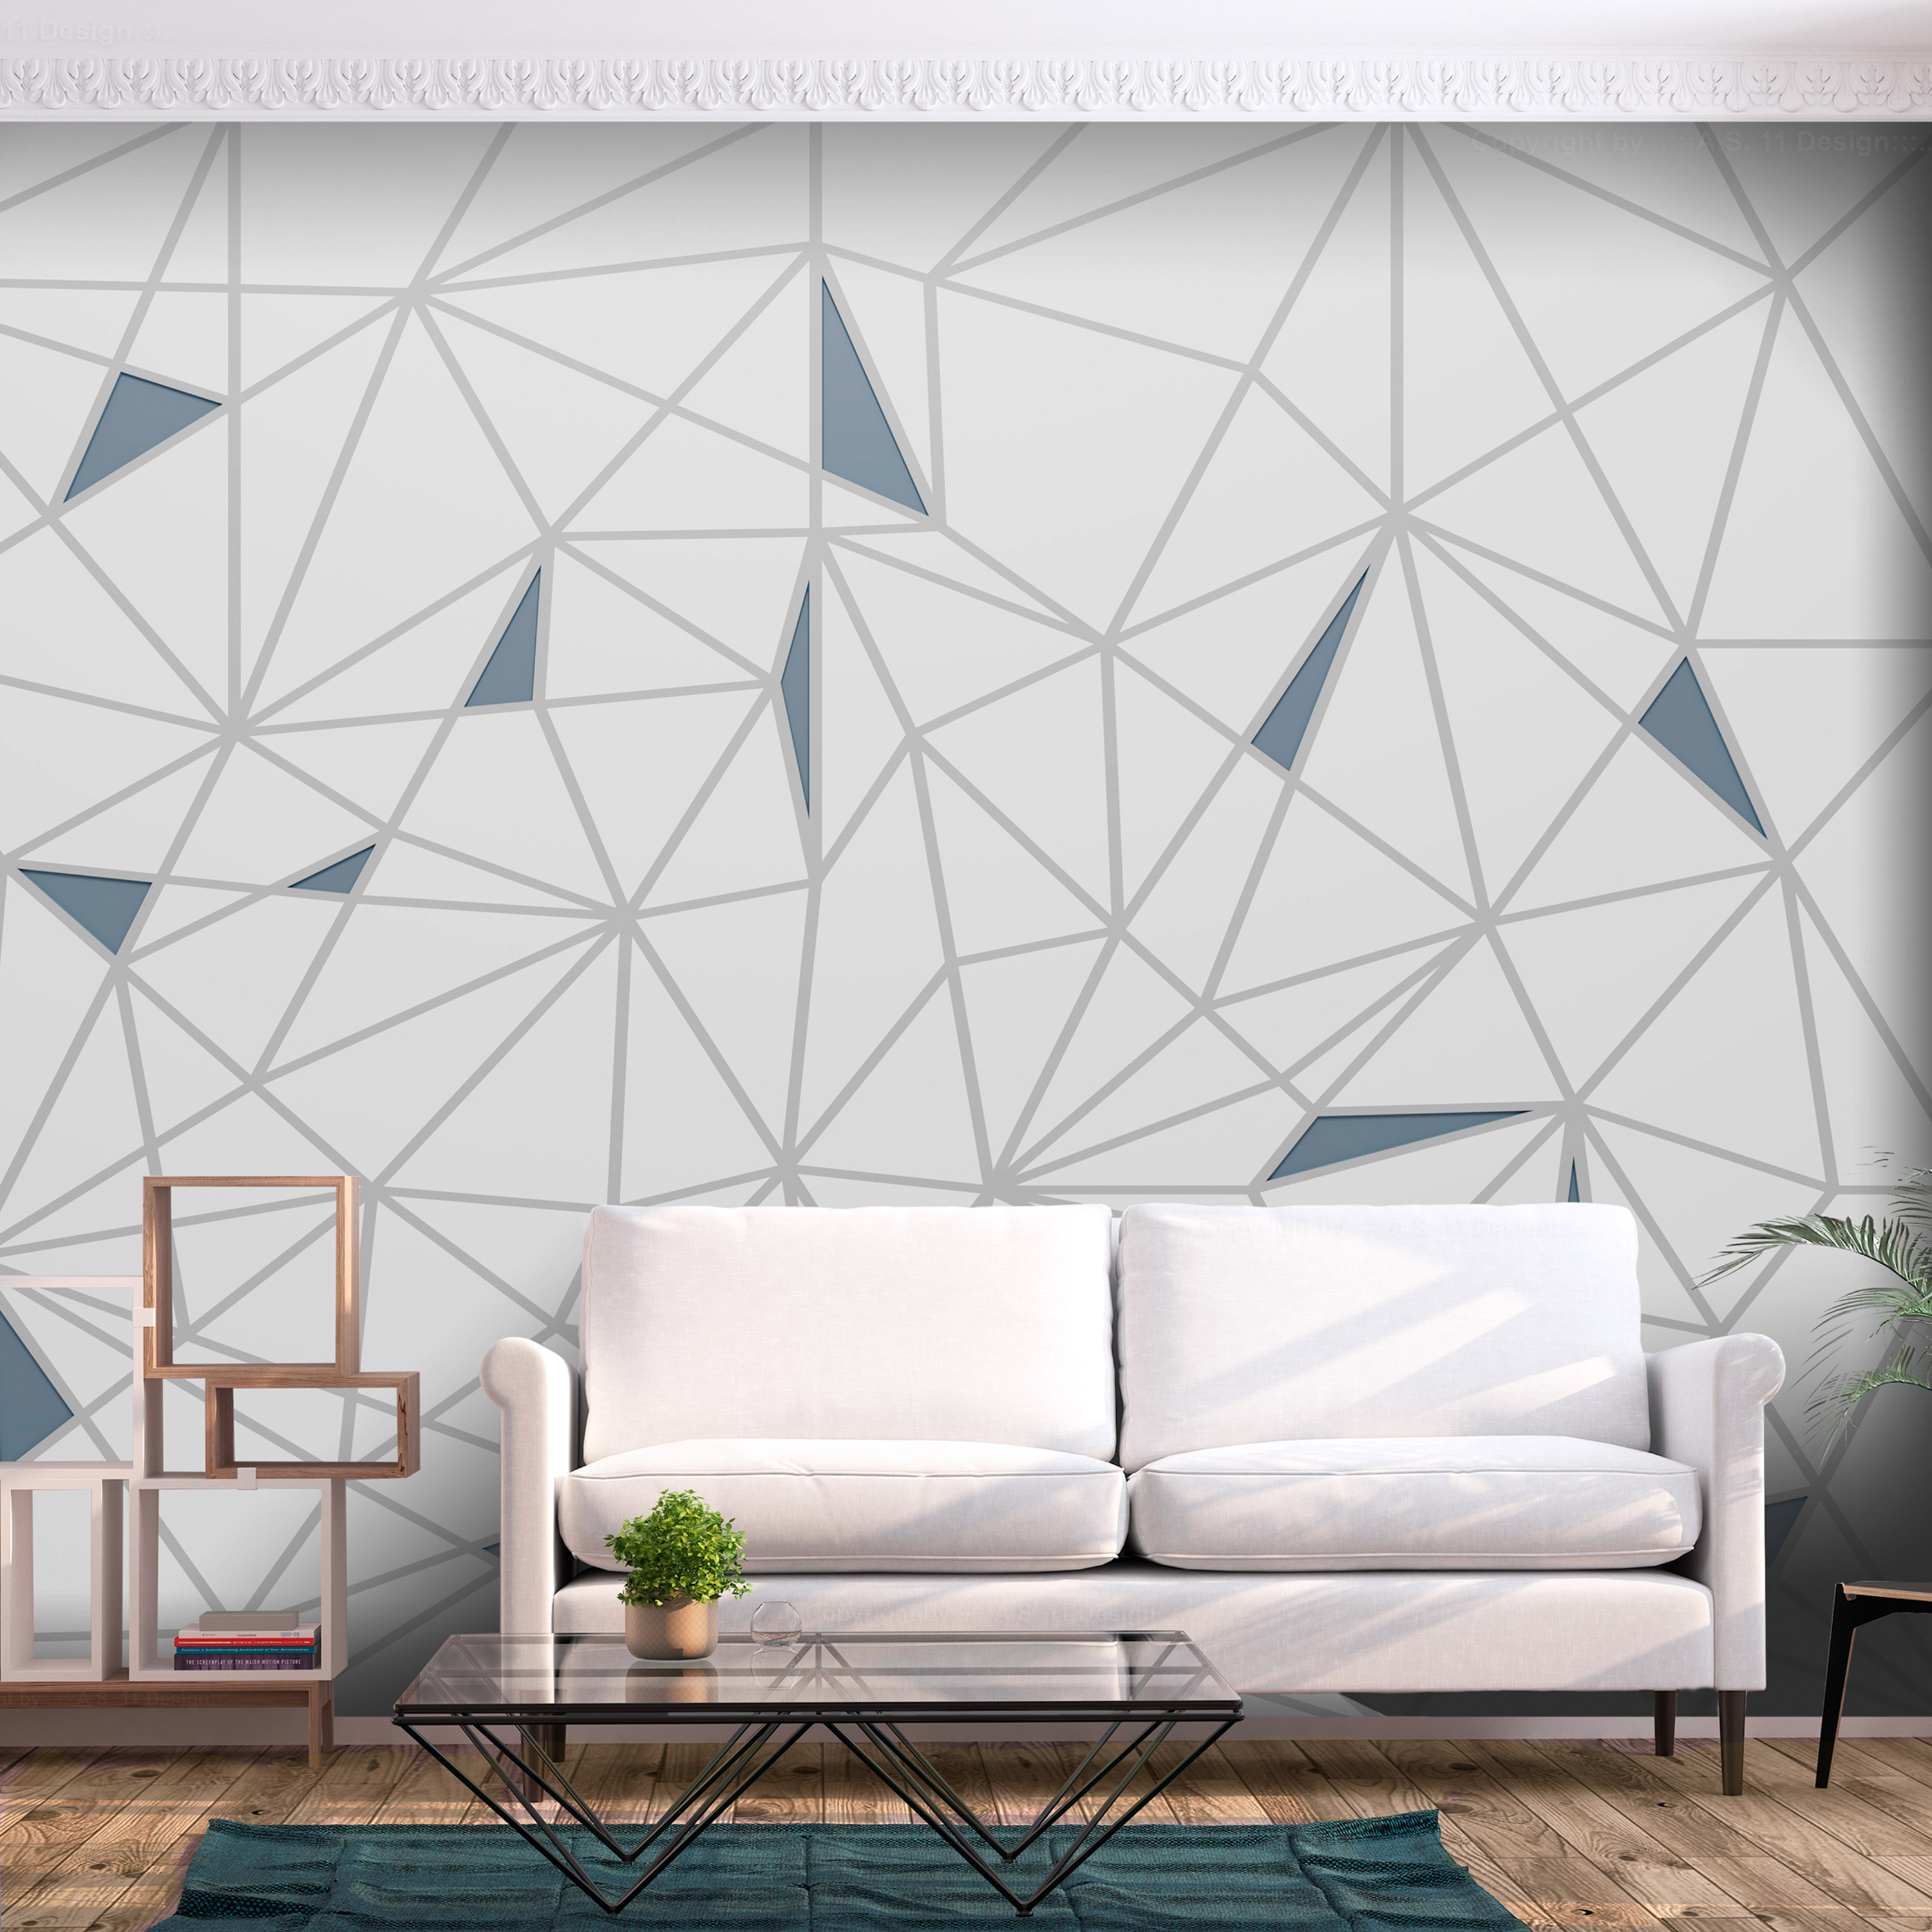 Self-adhesive Wallpaper - Lines of Intersection - 98x70